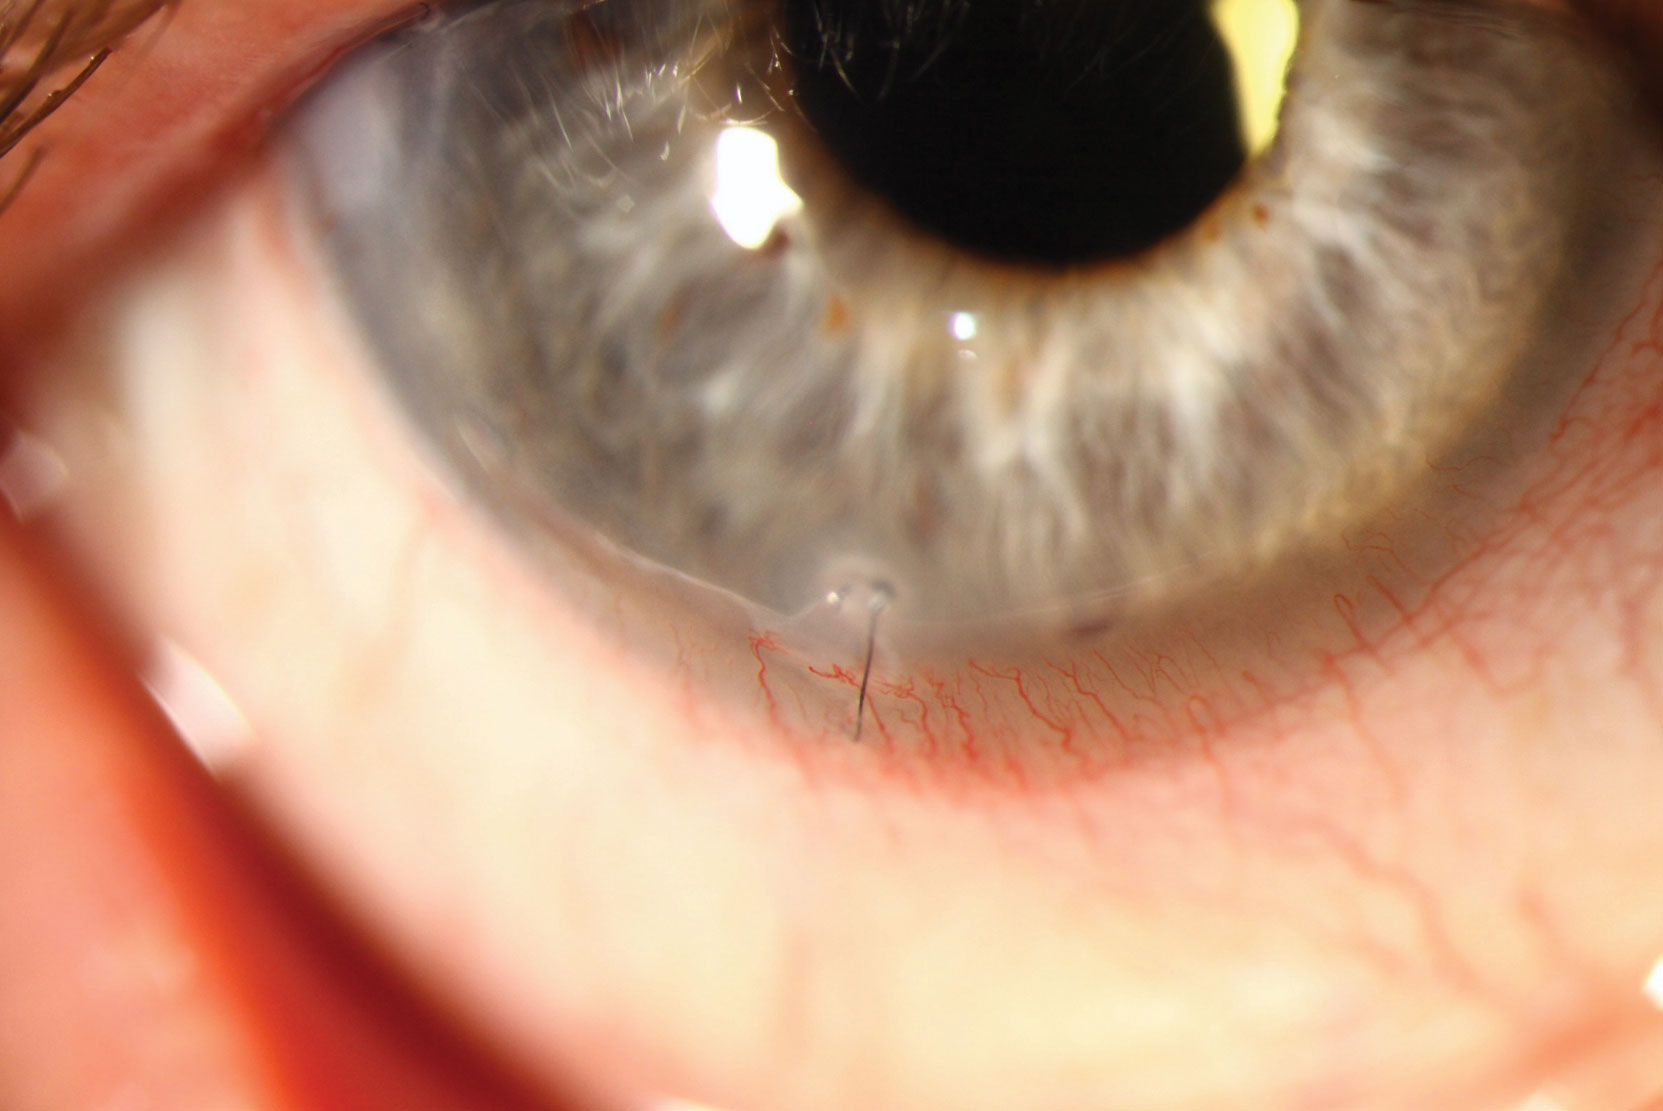 Monitor corneal sutures closely, as they provide a vector for infection.